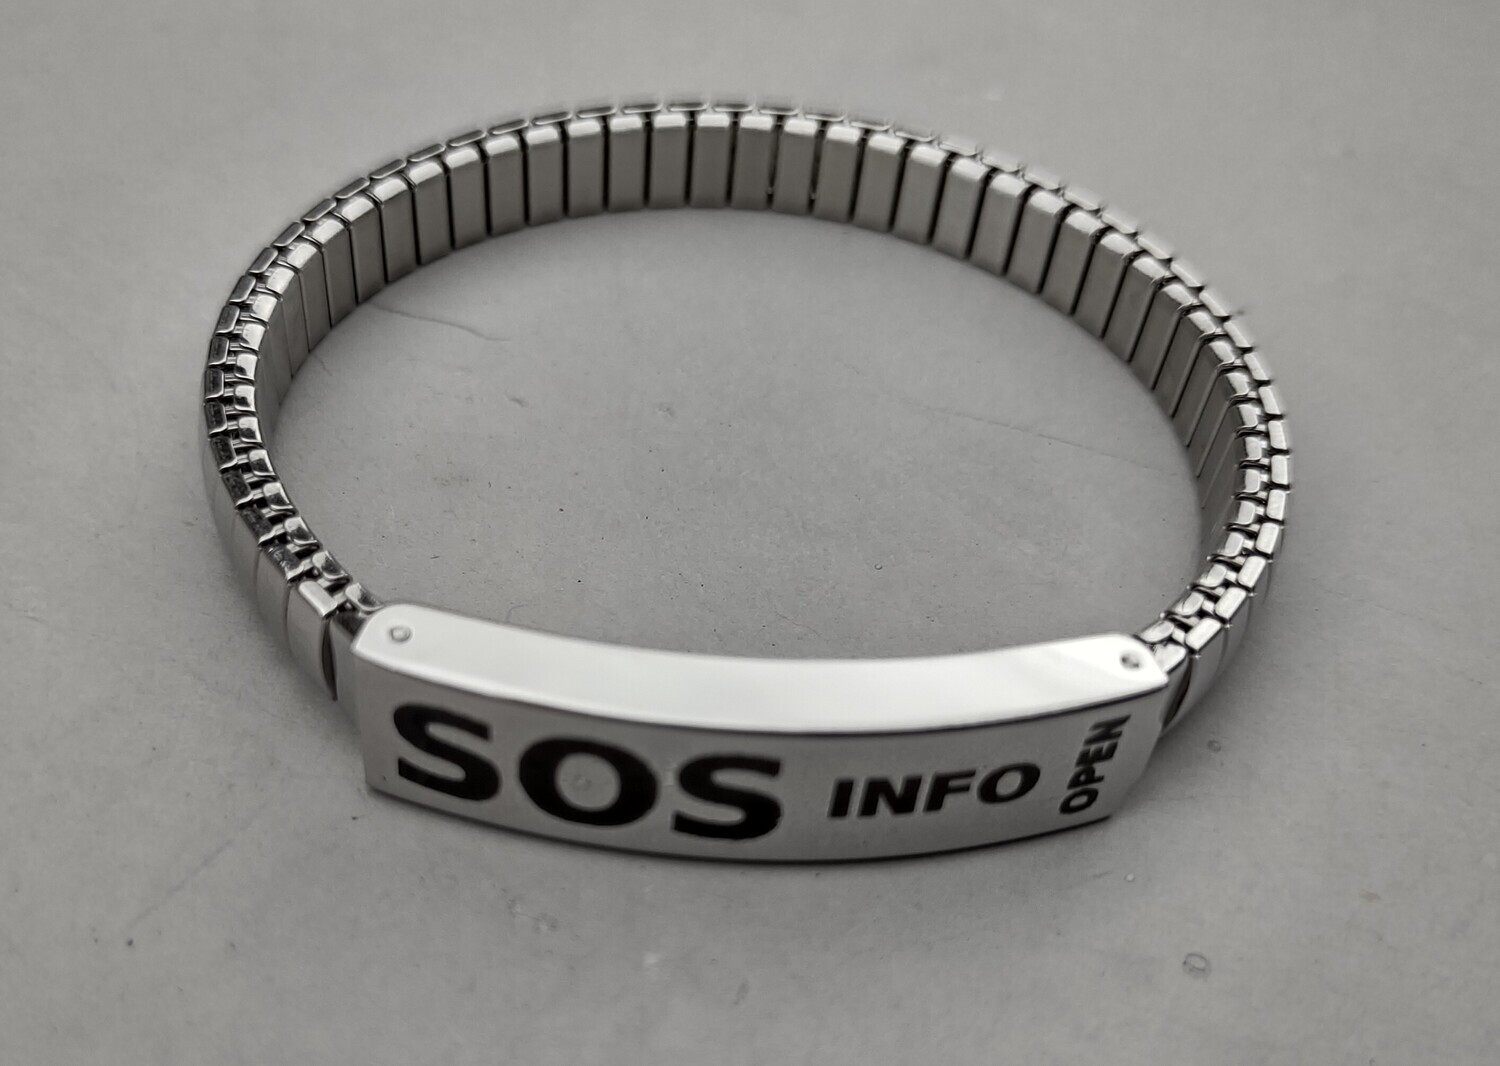 SOS wristband, openable, steel, stretchy